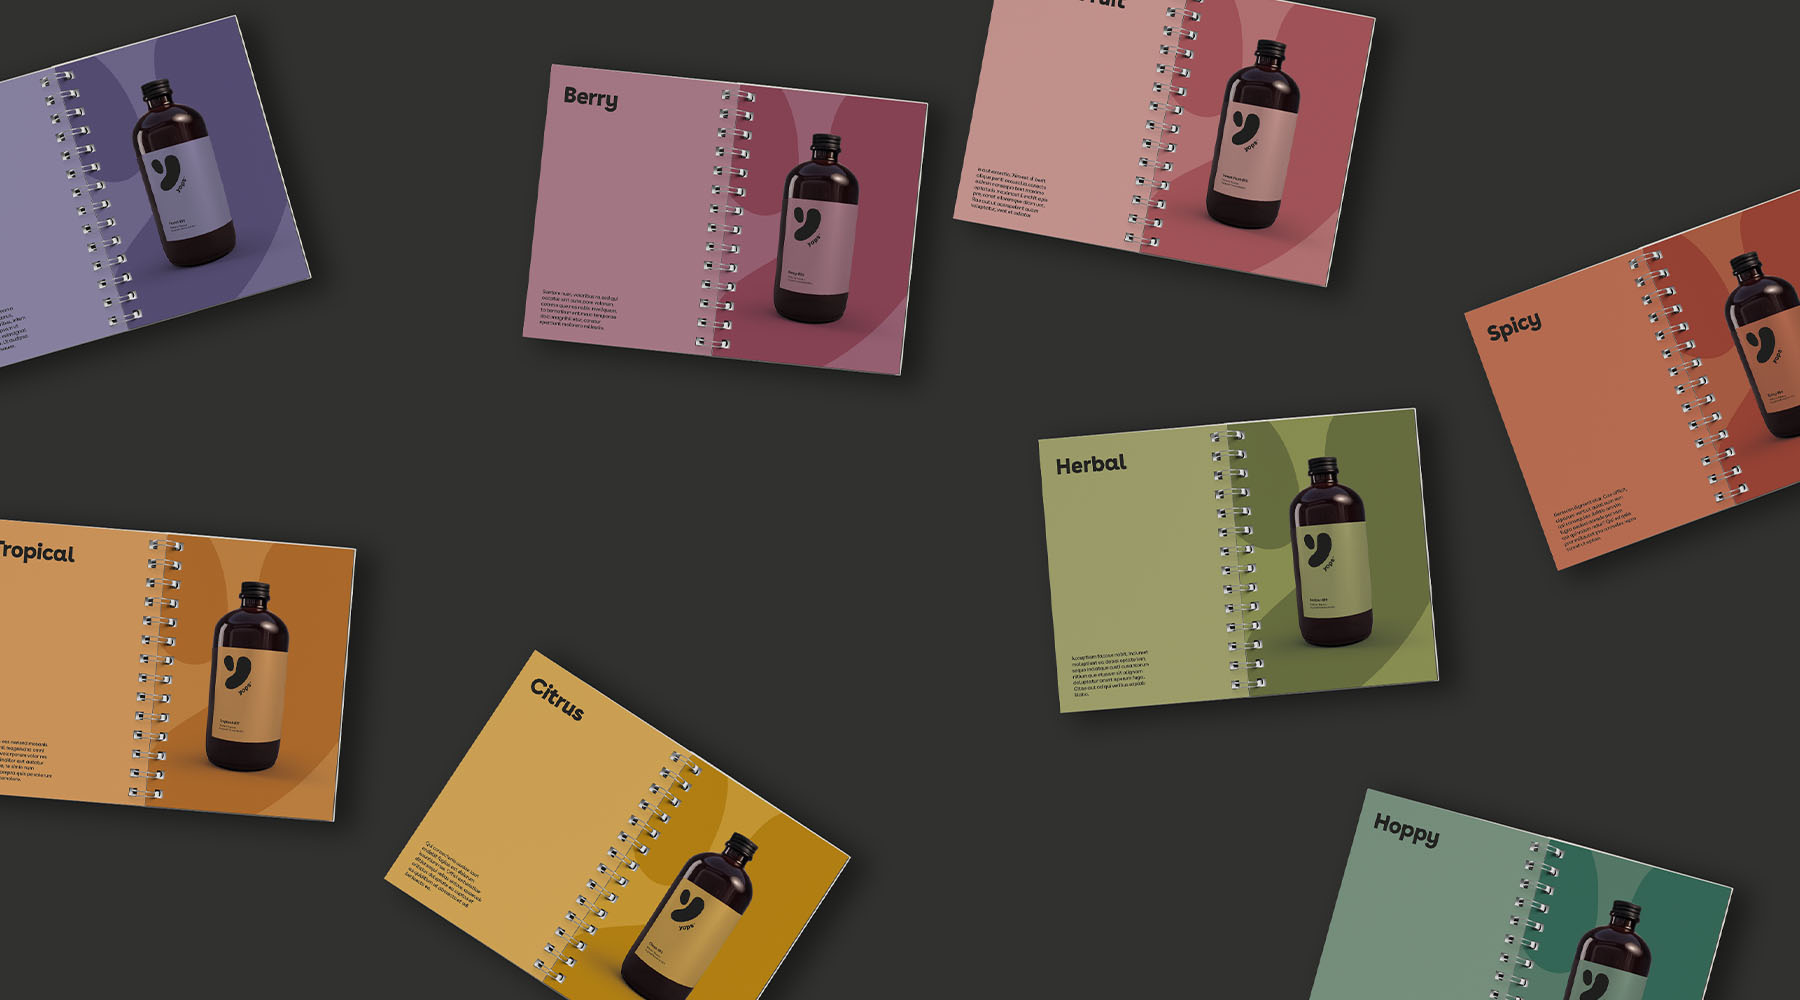 Flavour catalogue layouts in different colors spread out on dark background